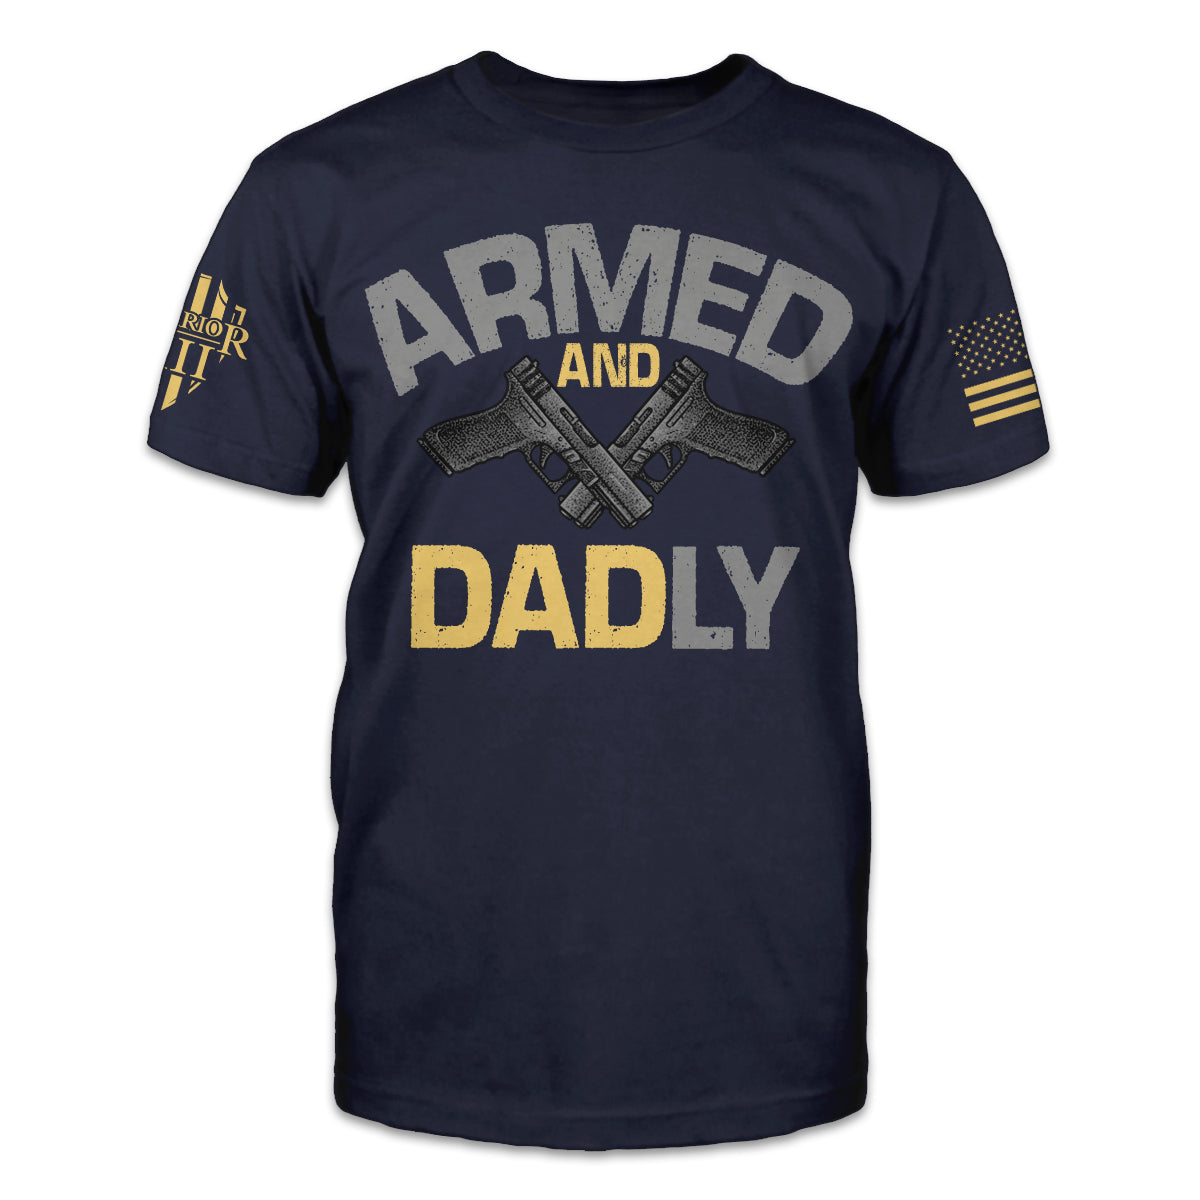 Navy t-shirt with the words "Armed and Dadly" Under the word armed, is a set of  black handguns and then 'Dadly' written below the guns with the word DAD being in a yellow with a grey L and Y